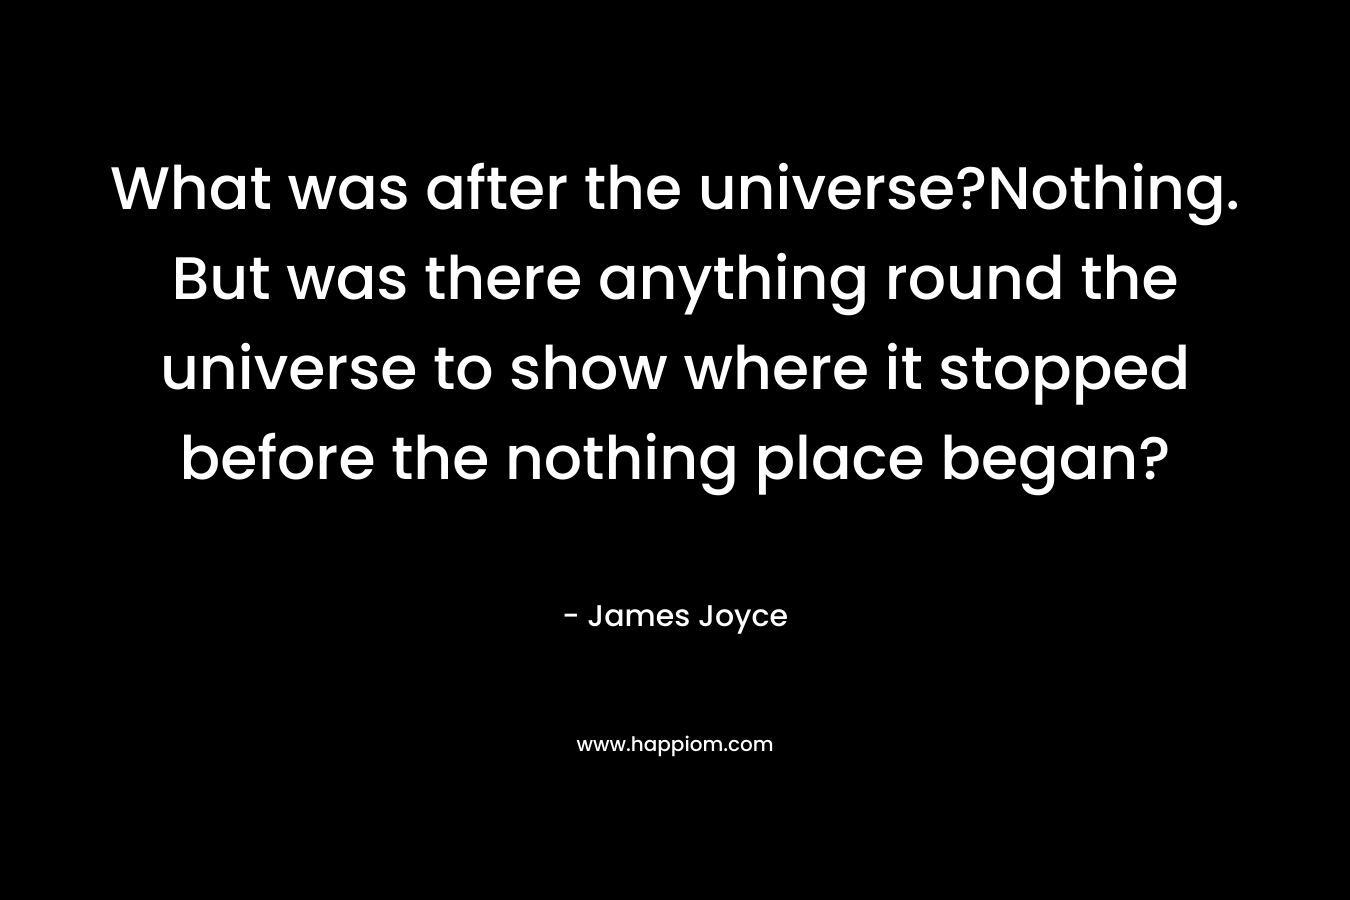 What was after the universe?Nothing. But was there anything round the universe to show where it stopped before the nothing place began?